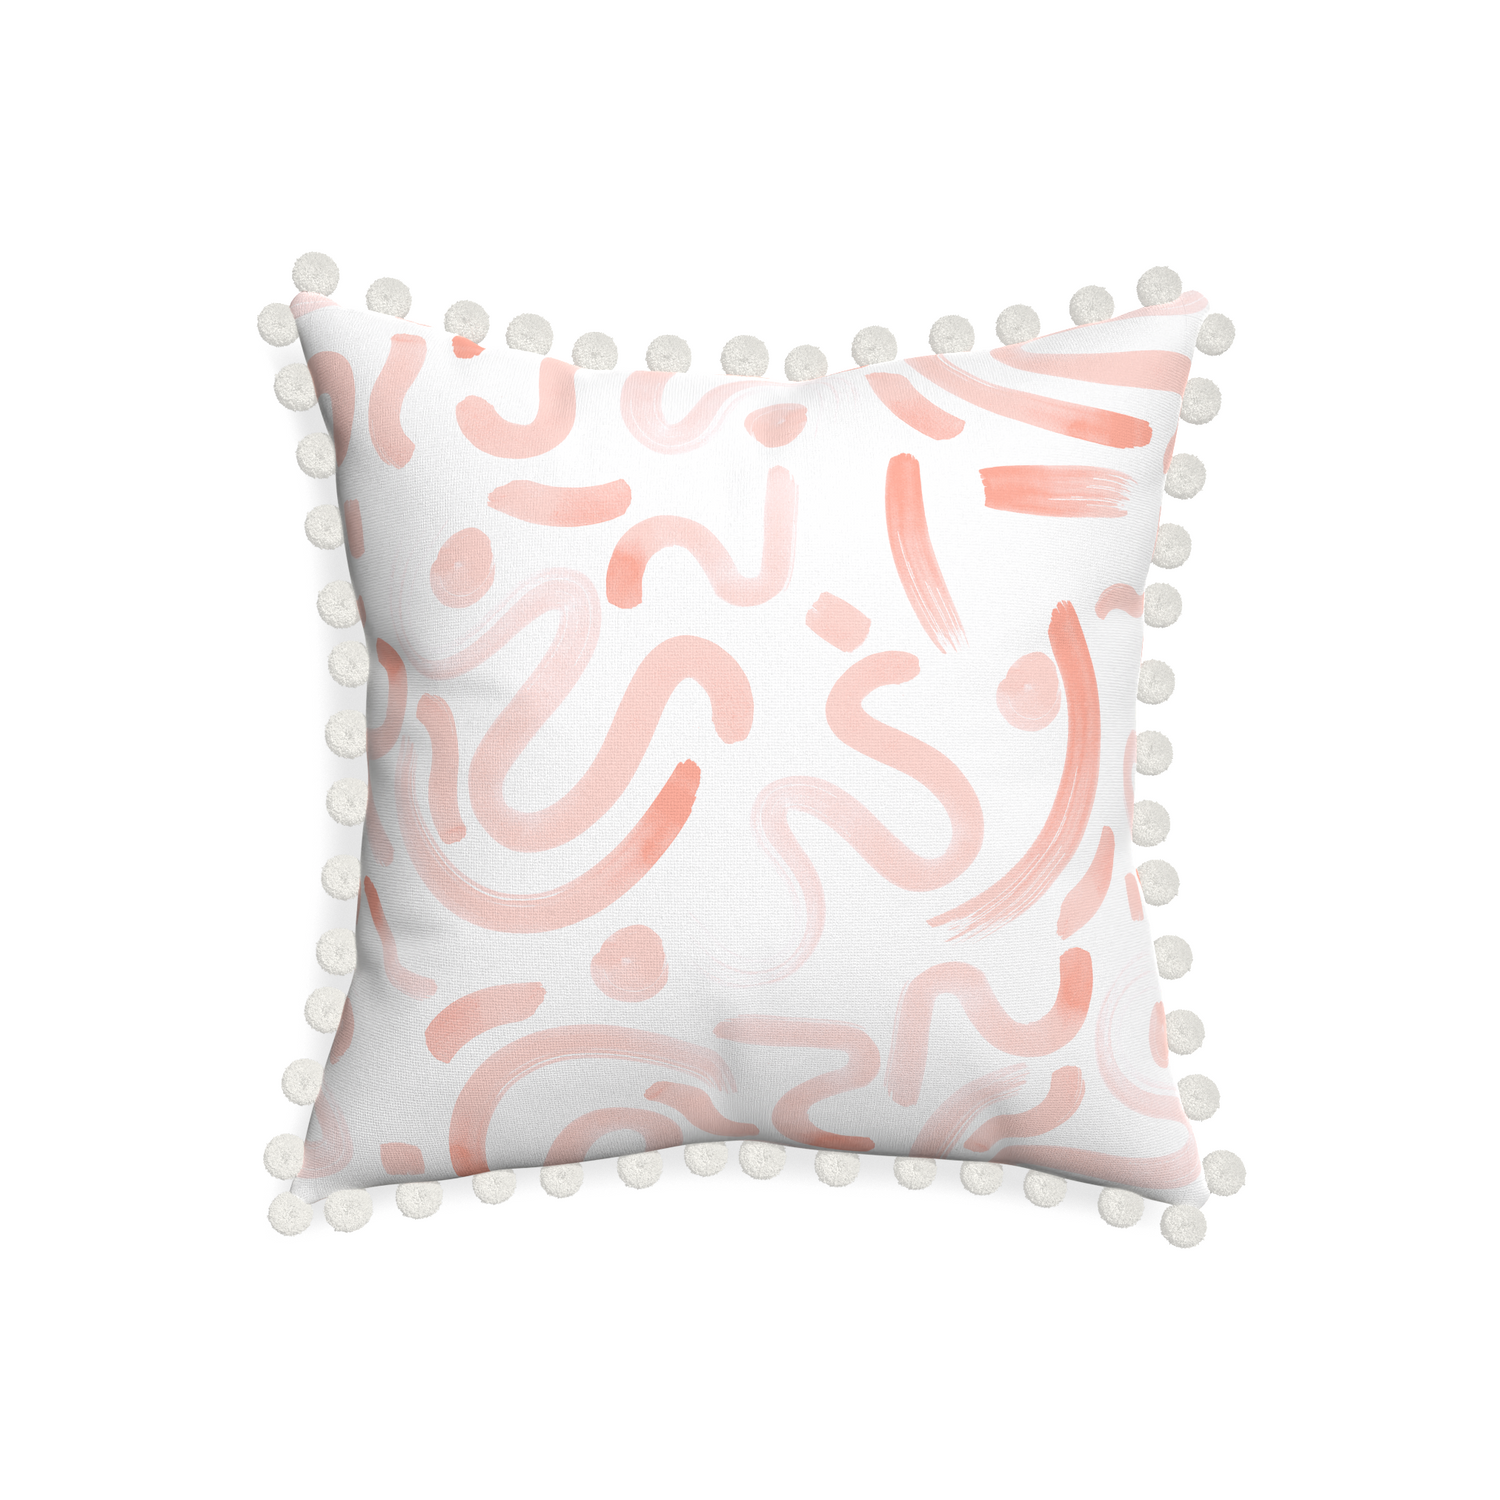 20-square hockney pink custom pink graphicpillow with snow pom pom on white background